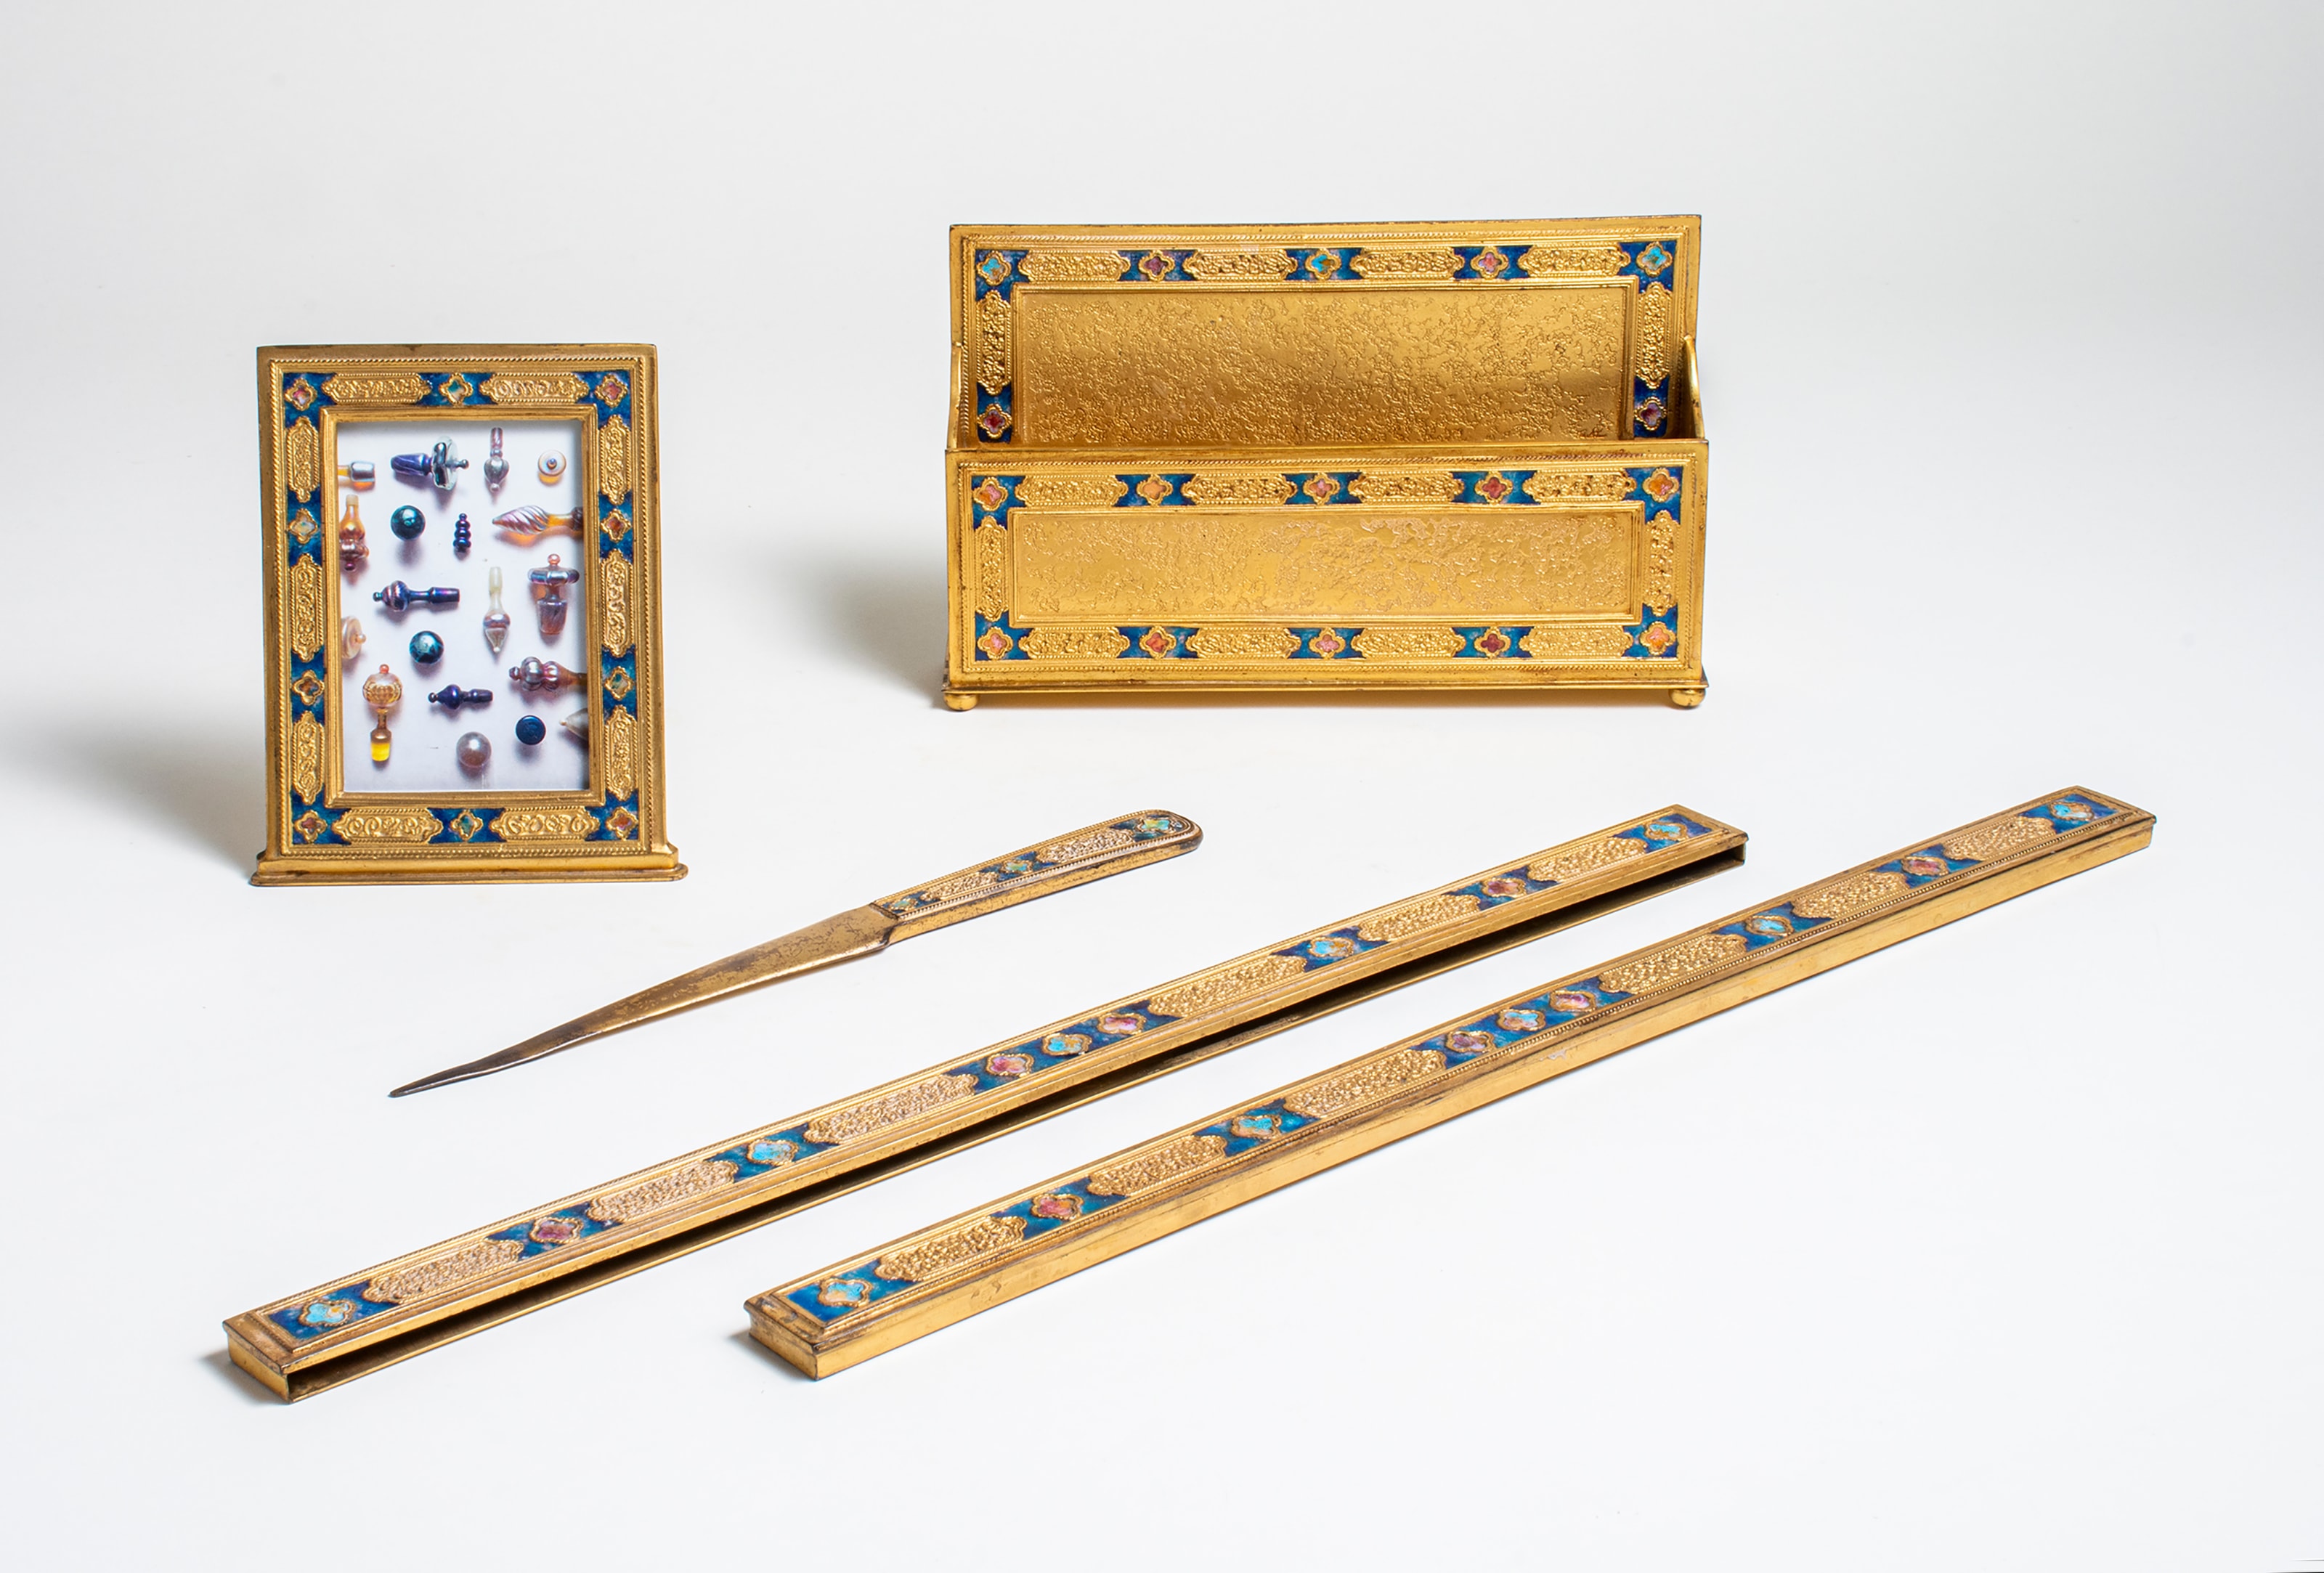 a gilt bronze desk set by louis c. tiffany furnaces inc. dating from the 1920s, the borders decorated with motif of inset blue enamel